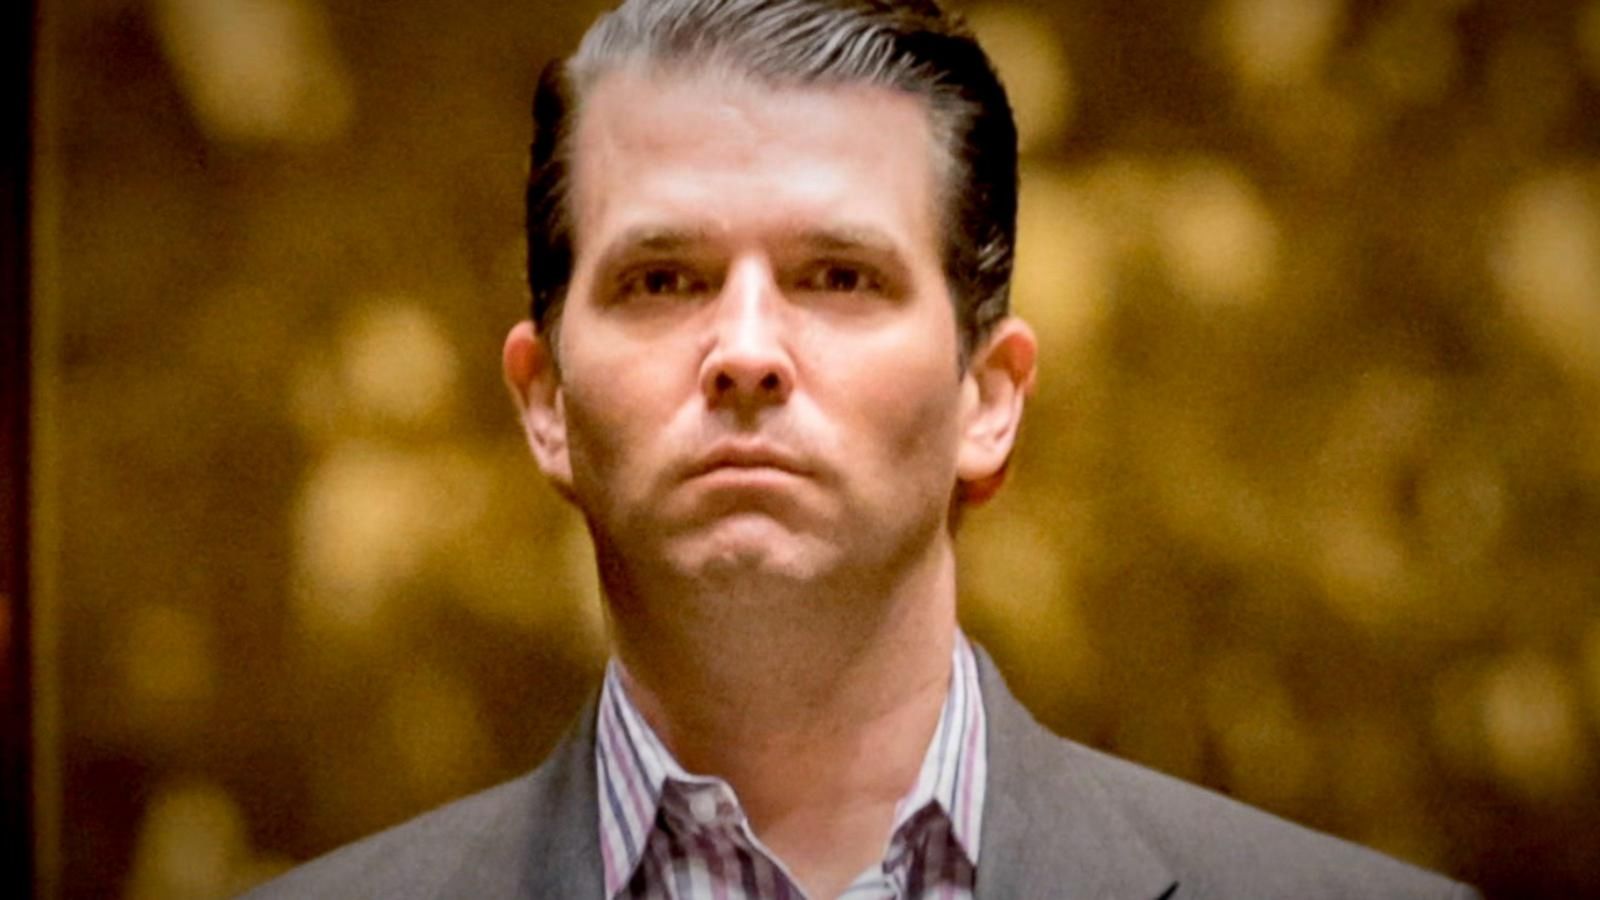 New details on Donald Trump Jr. meeting with Russian lawyer - Good ...